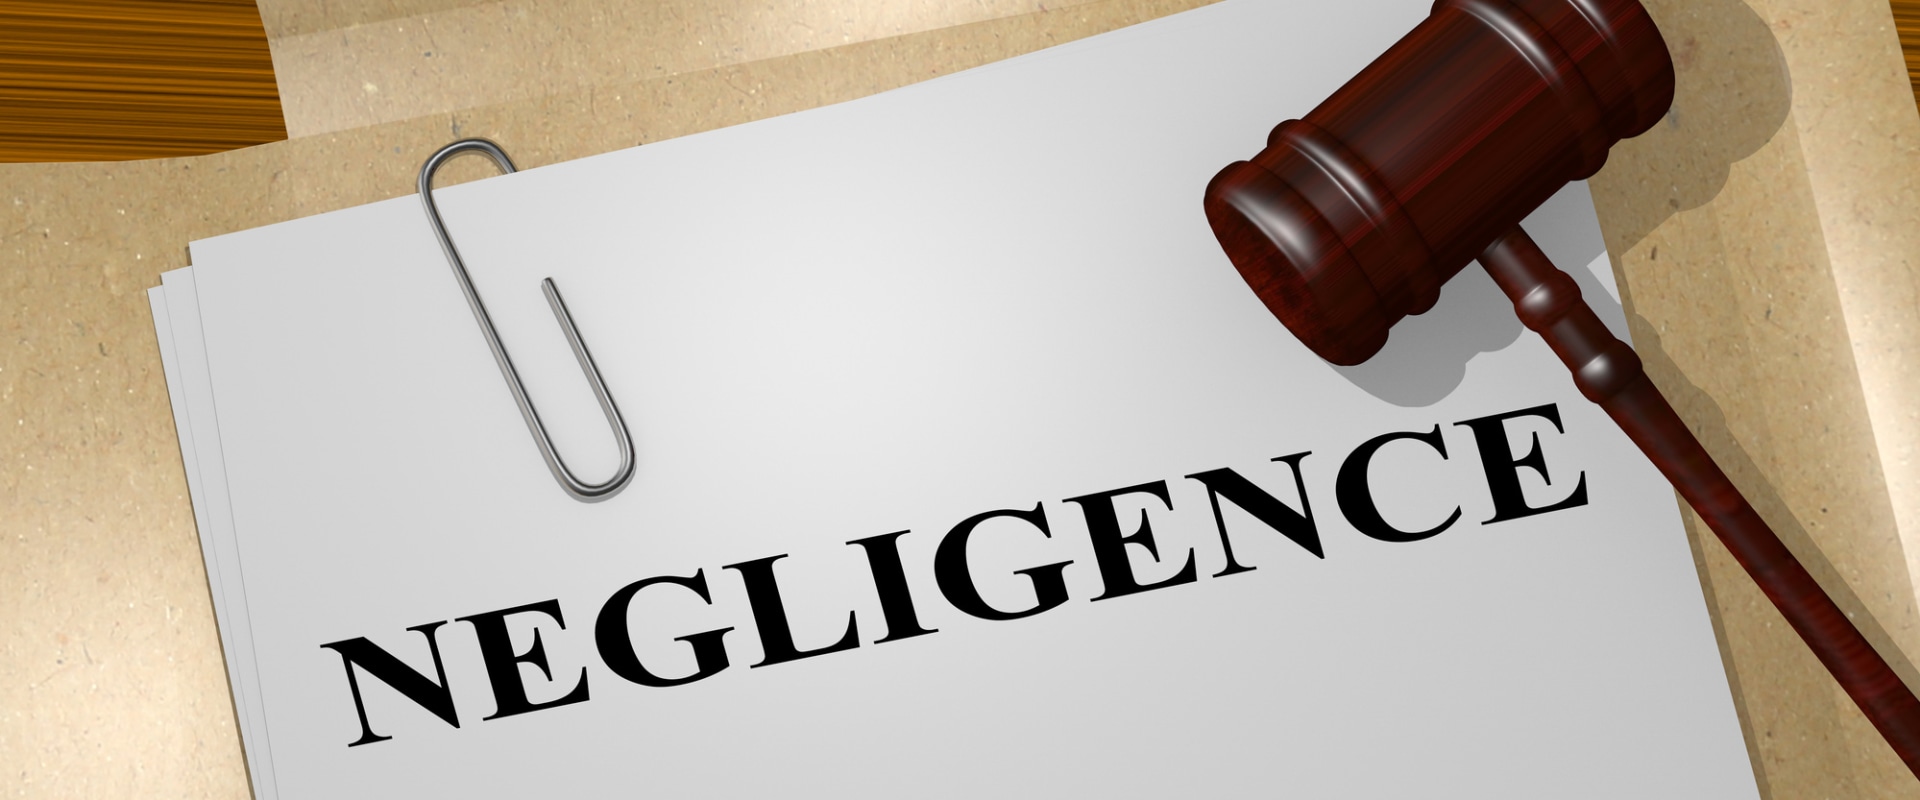 Understanding the 4 Elements of Proving Negligence